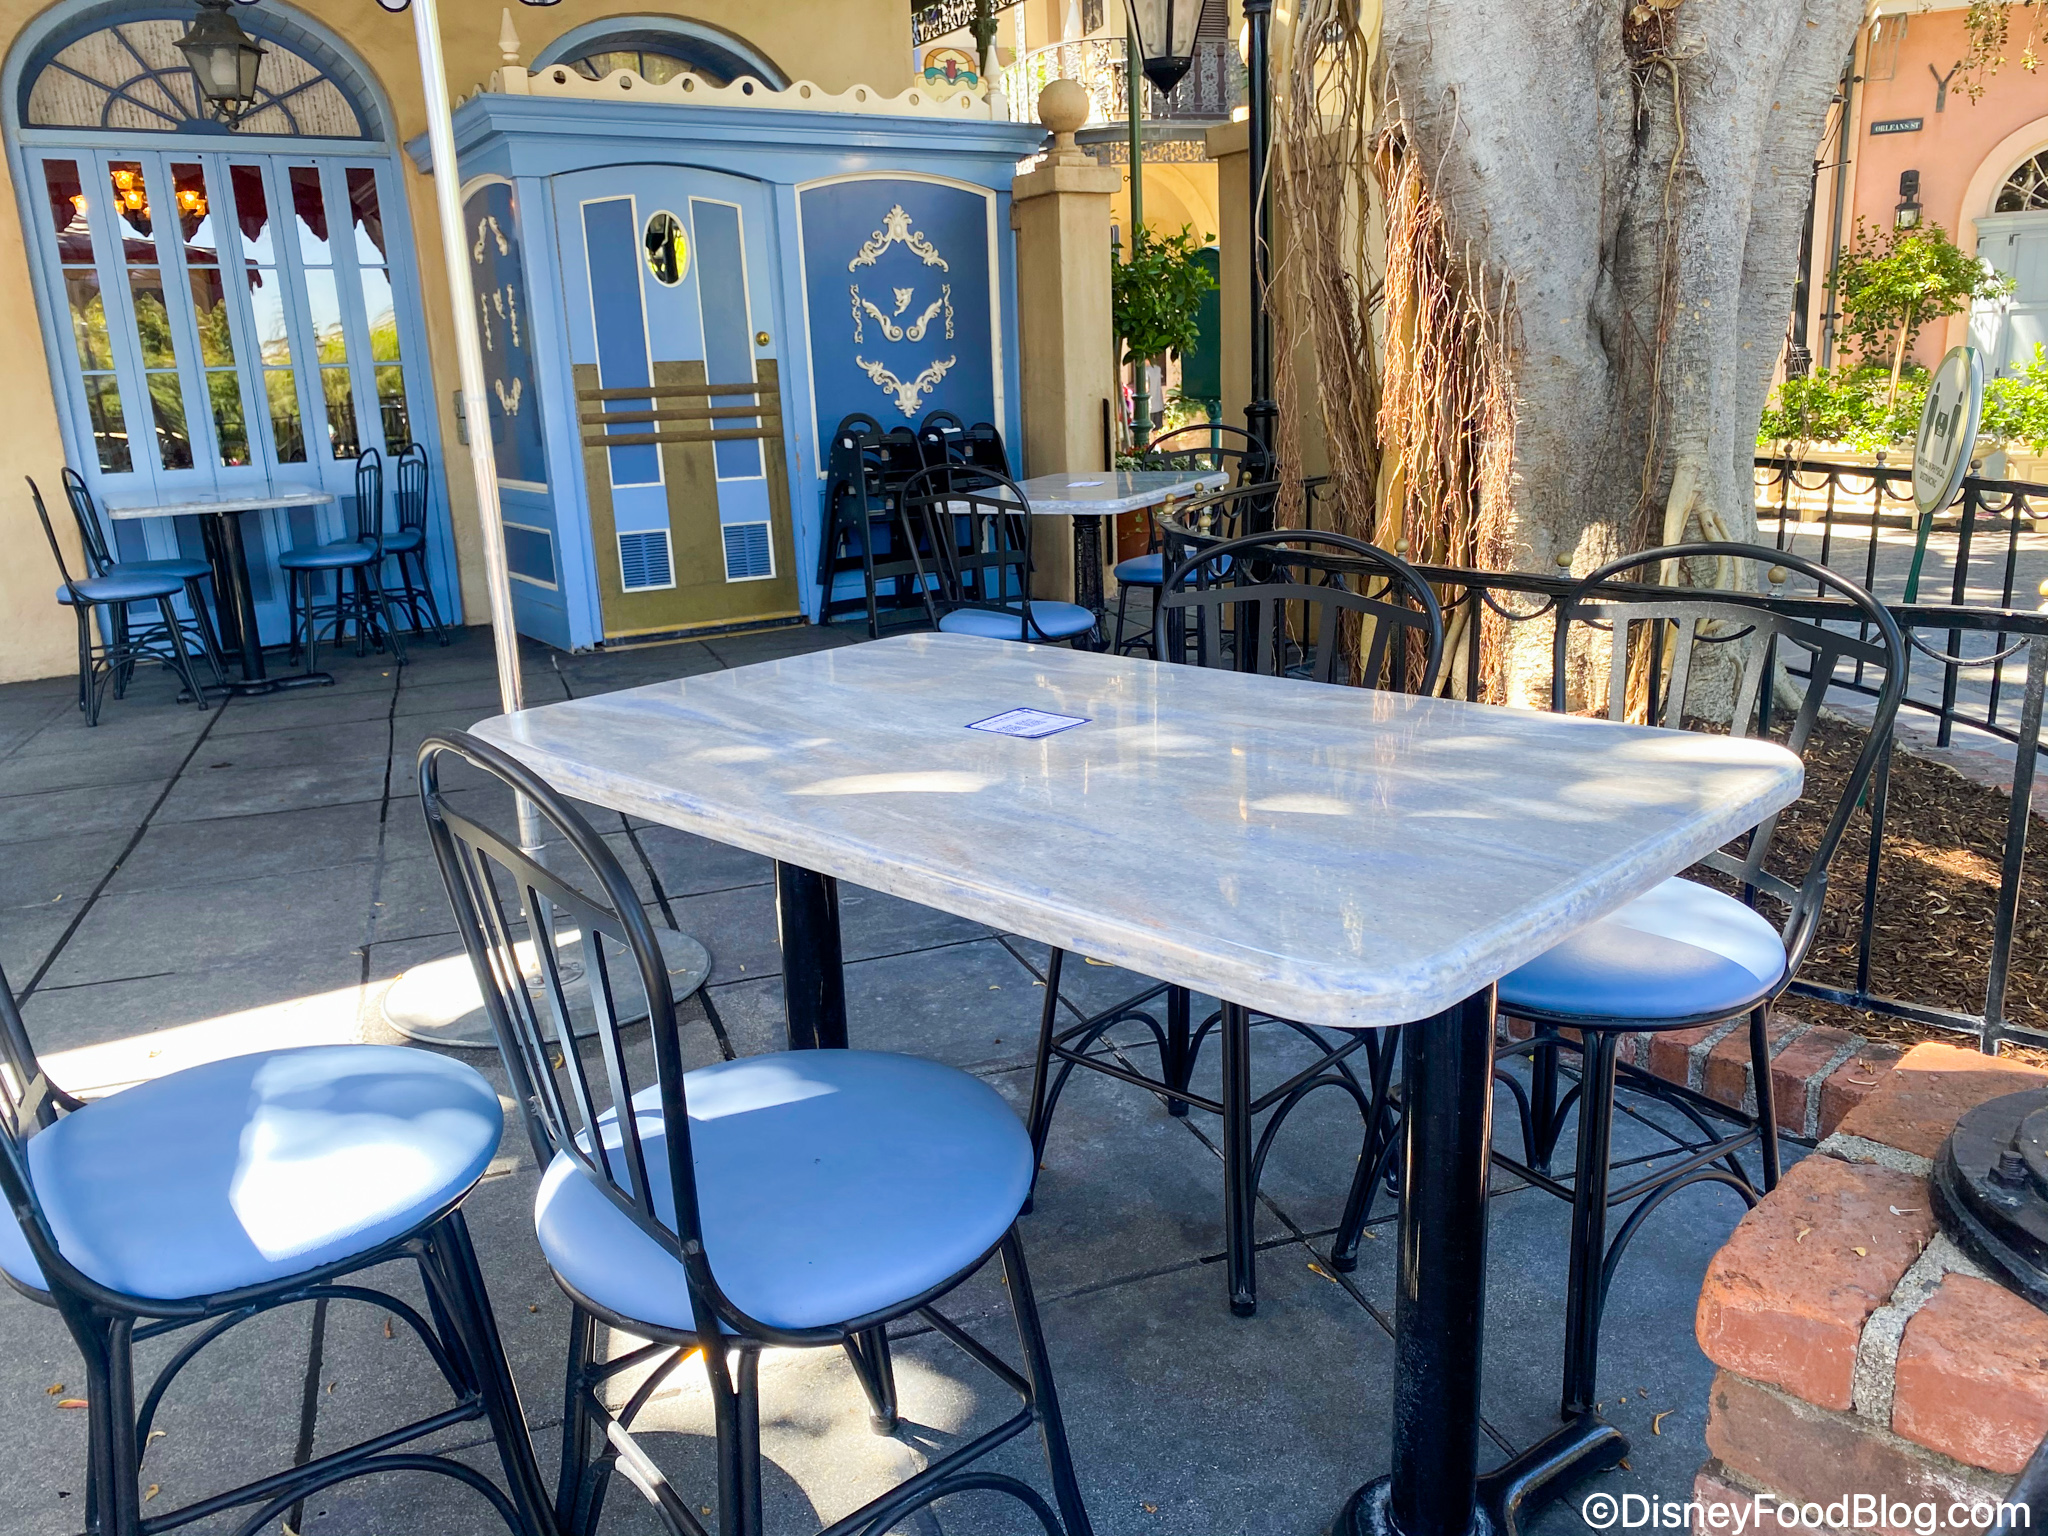 REVIEW: Was Changing An Iconic Disneyland Meal at Cafe Orleans the